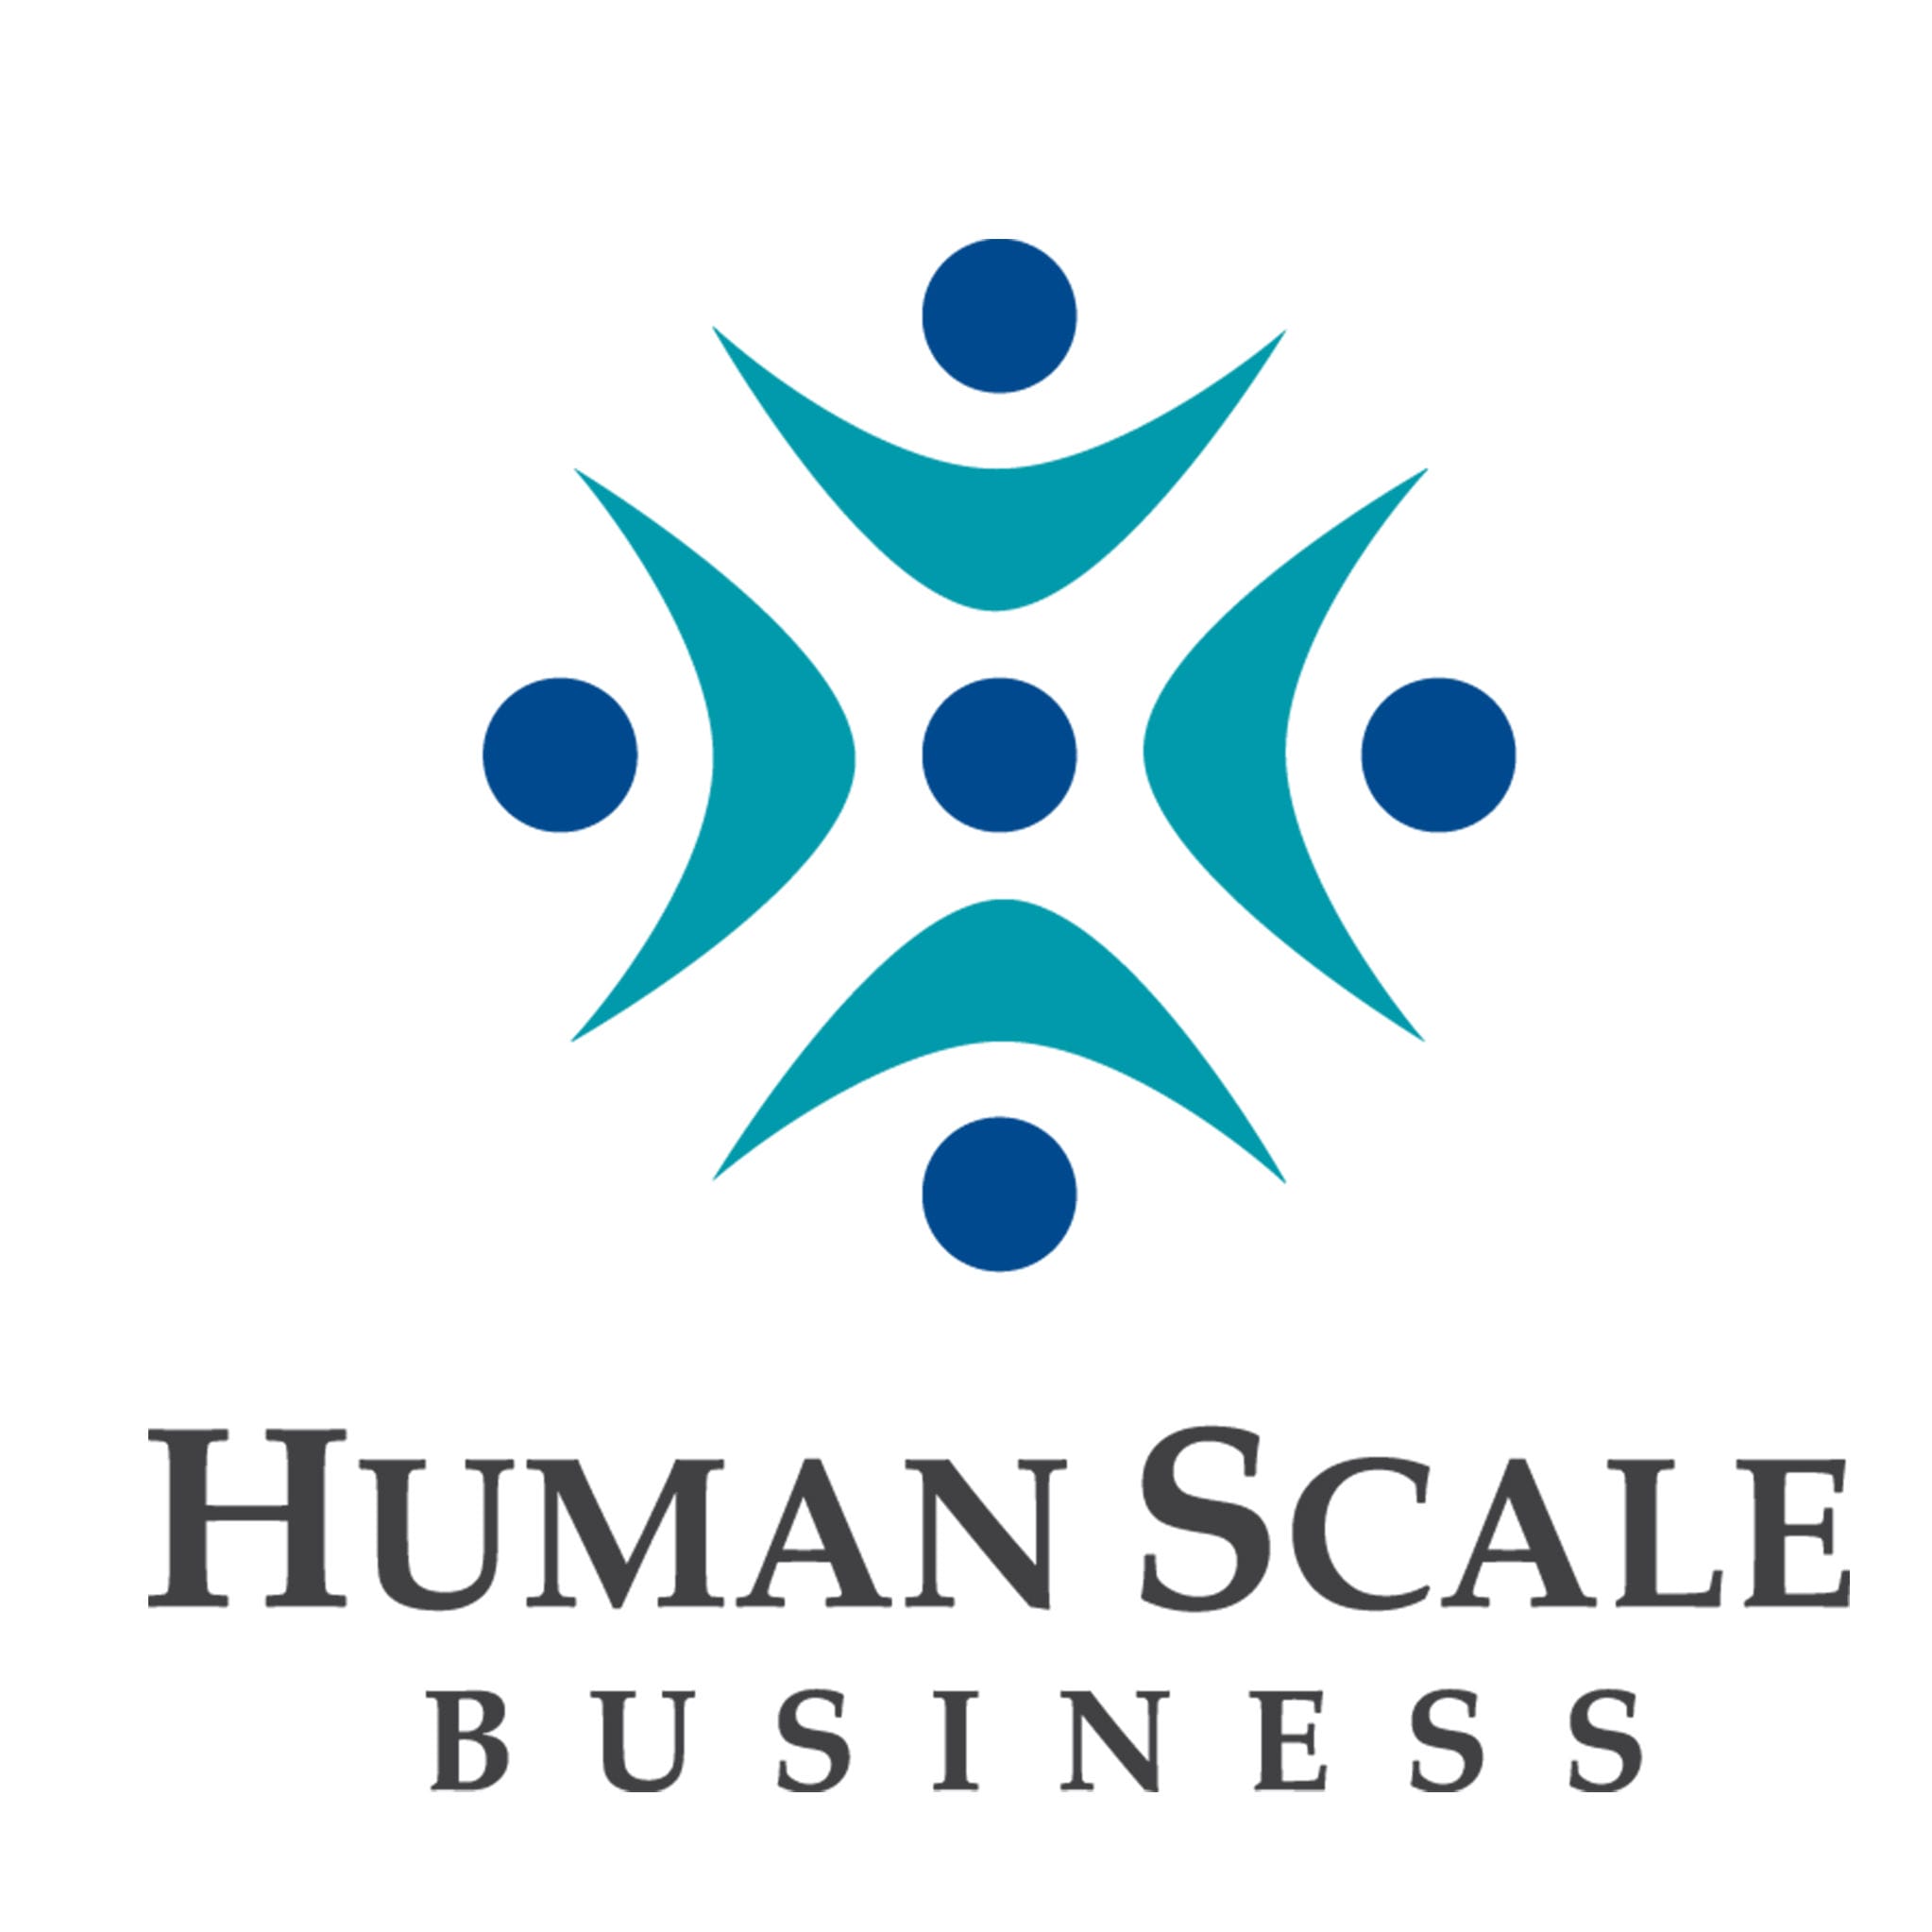 Human Scale Business